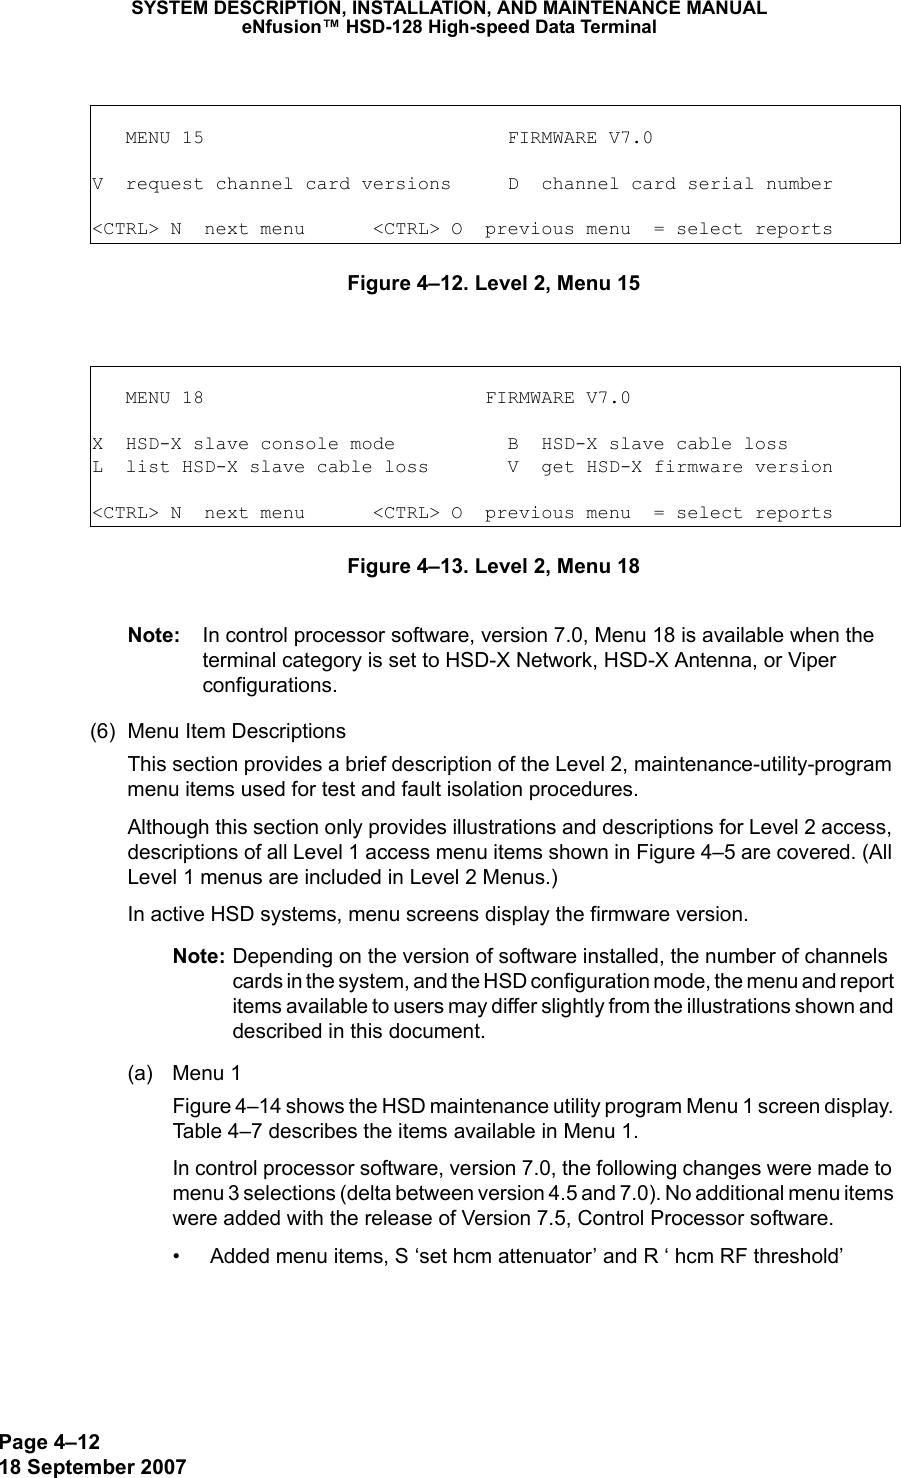 Page 4–1218 September 2007SYSTEM DESCRIPTION, INSTALLATION, AND MAINTENANCE MANUALeNfusion™ HSD-128 High-speed Data Terminal Figure 4–12. Level 2, Menu 15 Figure 4–13. Level 2, Menu 18 Note: In control processor software, version 7.0, Menu 18 is available when the terminal category is set to HSD-X Network, HSD-X Antenna, or Viper configurations.  (6) Menu Item DescriptionsThis section provides a brief description of the Level 2, maintenance-utility-program menu items used for test and fault isolation procedures. Although this section only provides illustrations and descriptions for Level 2 access, descriptions of all Level 1 access menu items shown in Figure 4–5 are covered. (All Level 1 menus are included in Level 2 Menus.)In active HSD systems, menu screens display the firmware version.Note: Depending on the version of software installed, the number of channels cards in the system, and the HSD configuration mode, the menu and report items available to users may differ slightly from the illustrations shown and described in this document. (a) Menu 1Figure 4–14 shows the HSD maintenance utility program Menu 1 screen display. Table 4–7 describes the items available in Menu 1.In control processor software, version 7.0, the following changes were made to menu 3 selections (delta between version 4.5 and 7.0). No additional menu items were added with the release of Version 7.5, Control Processor software.• Added menu items, S ‘set hcm attenuator’ and R ‘ hcm RF threshold’   MENU 15                           FIRMWARE V7.0V  request channel card versions     D  channel card serial number&lt;CTRL&gt; N  next menu      &lt;CTRL&gt; O  previous menu  = select reports   MENU 18                         FIRMWARE V7.0X  HSD-X slave console mode          B  HSD-X slave cable lossL  list HSD-X slave cable loss       V  get HSD-X firmware version&lt;CTRL&gt; N  next menu      &lt;CTRL&gt; O  previous menu  = select reports